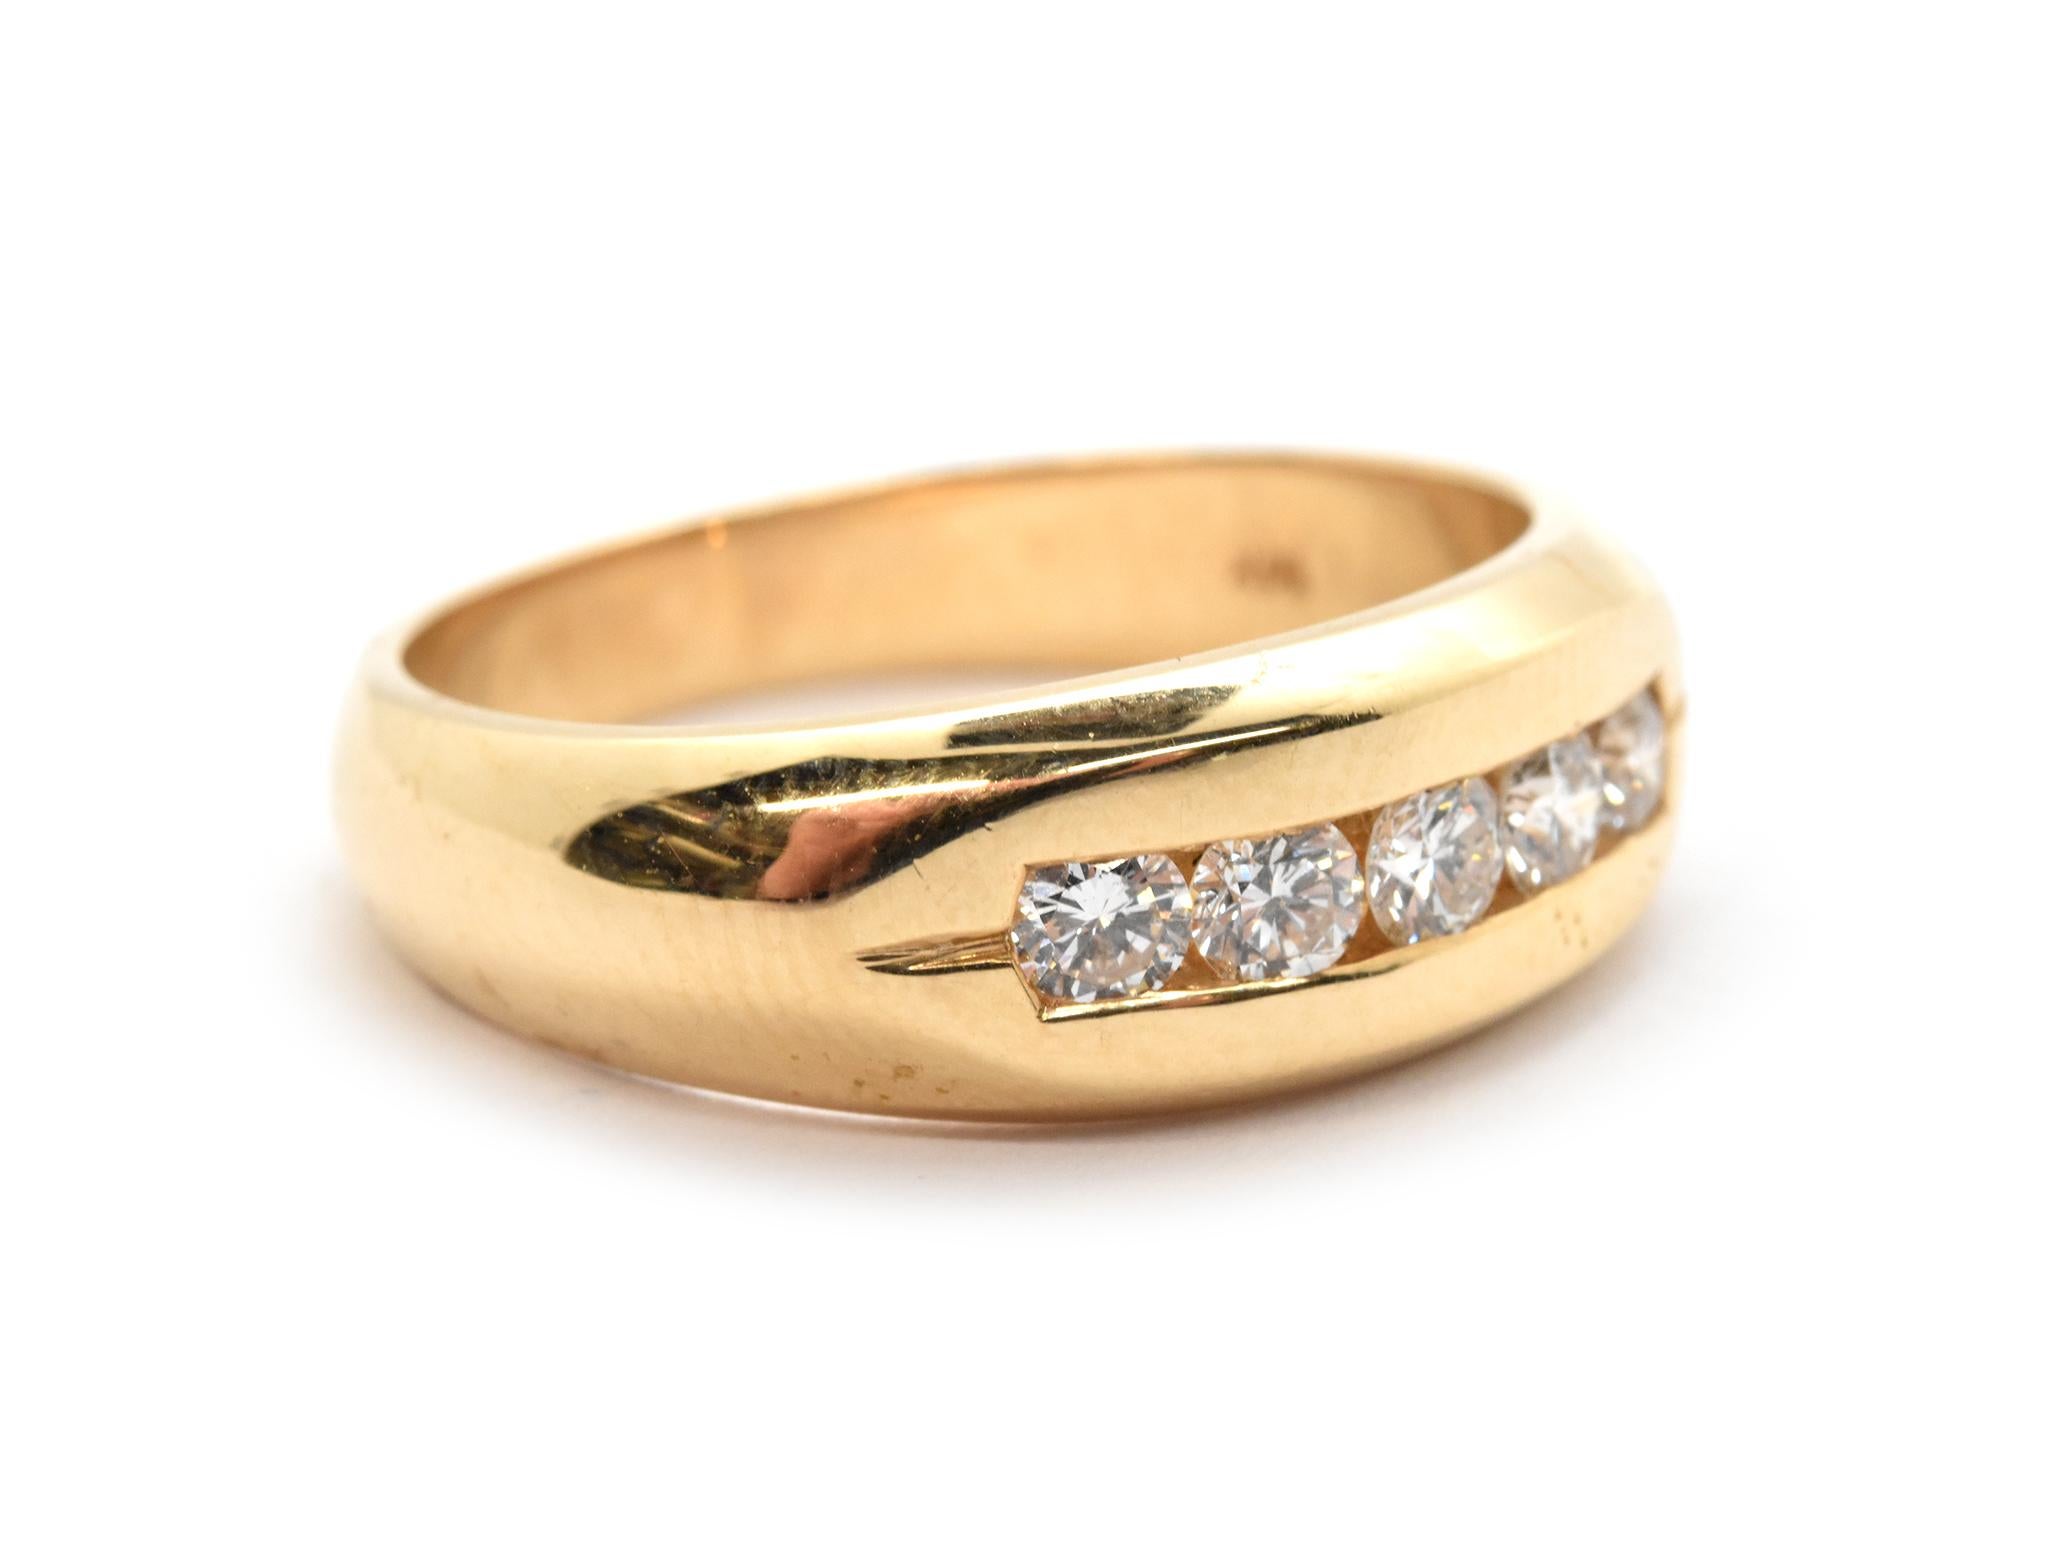 This gorgeous band is made in 14k yellow gold, and it holds channel-set round brilliant-cut diamonds. The diamonds have a total weight of 0.25ct, and they are graded G in color and VS-SI in clarity. The band measures 8mm wide, and it weighs 6.3